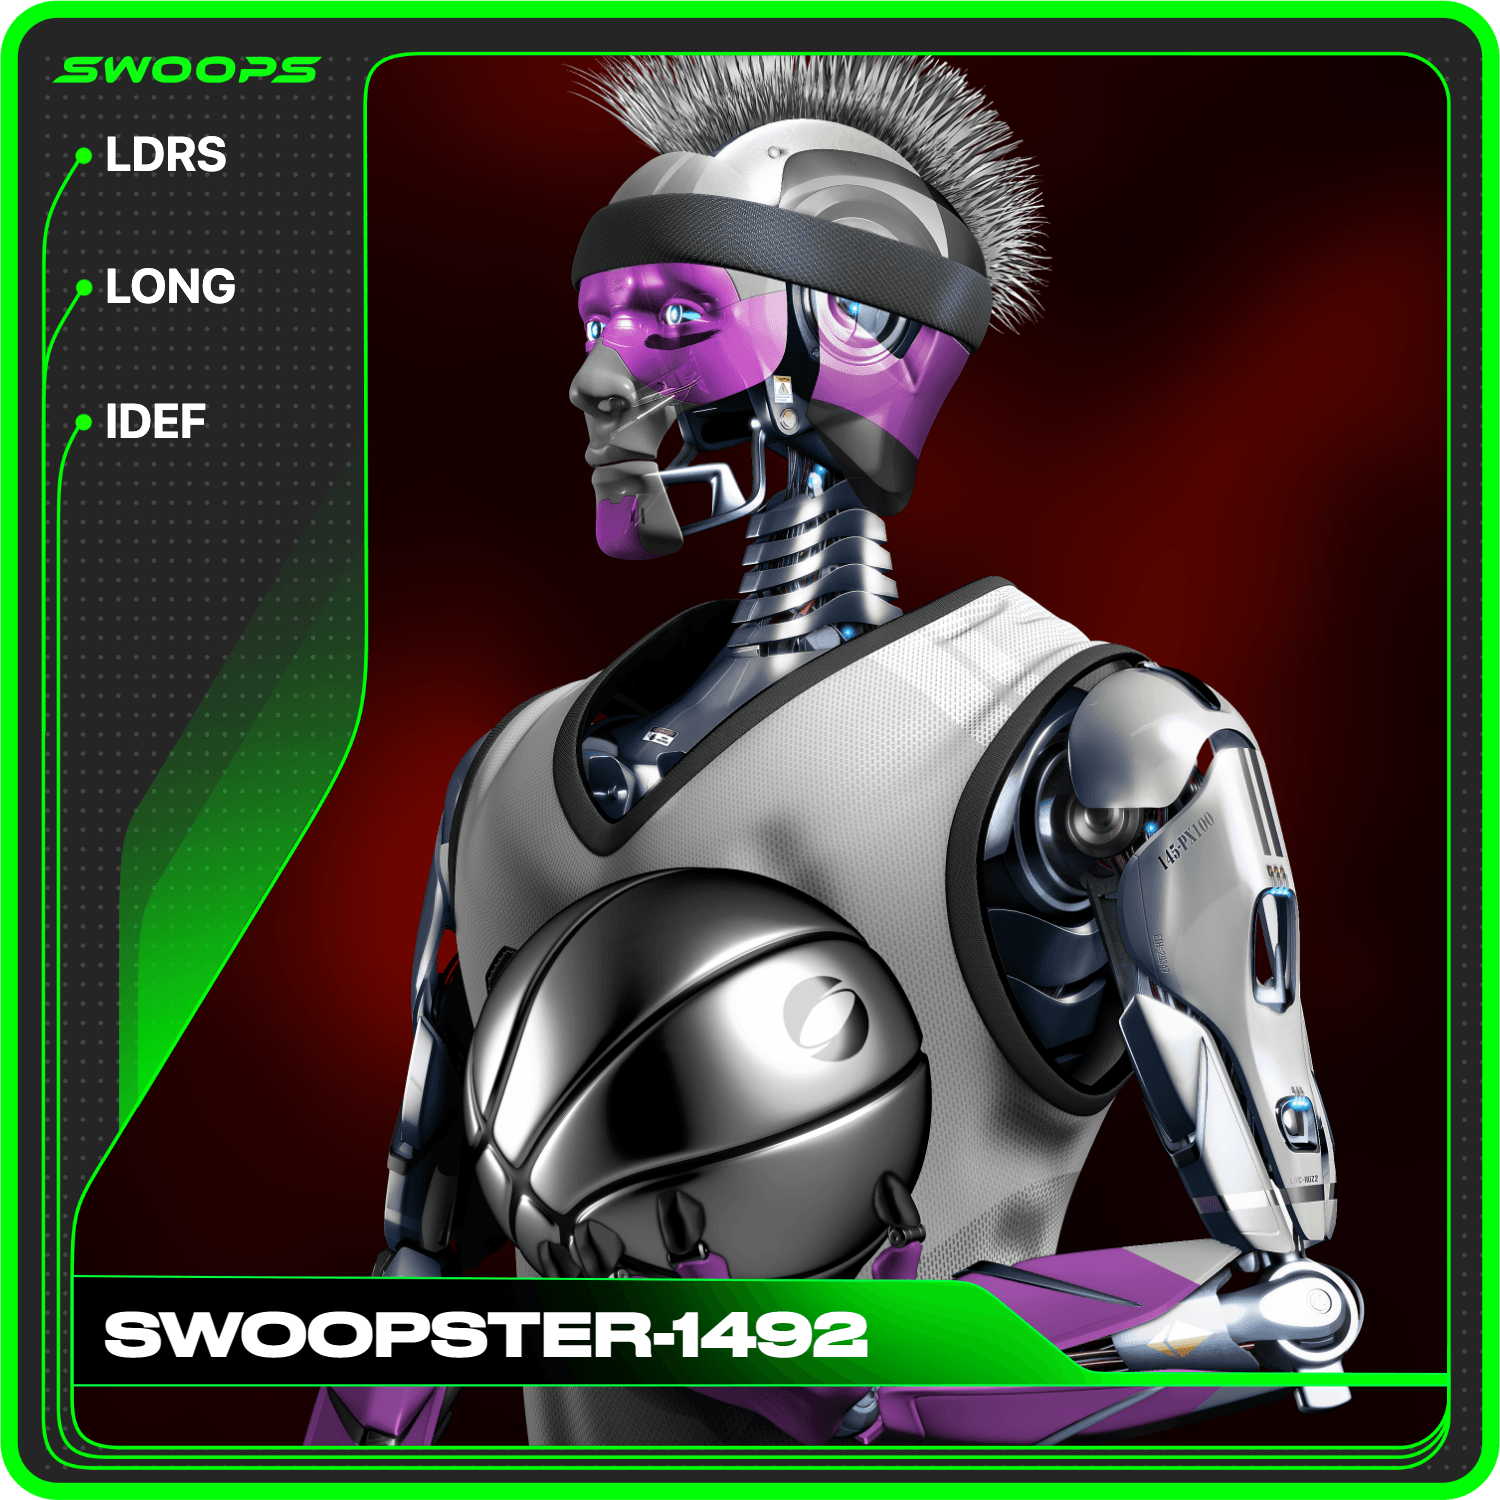 SWOOPSTER-1492